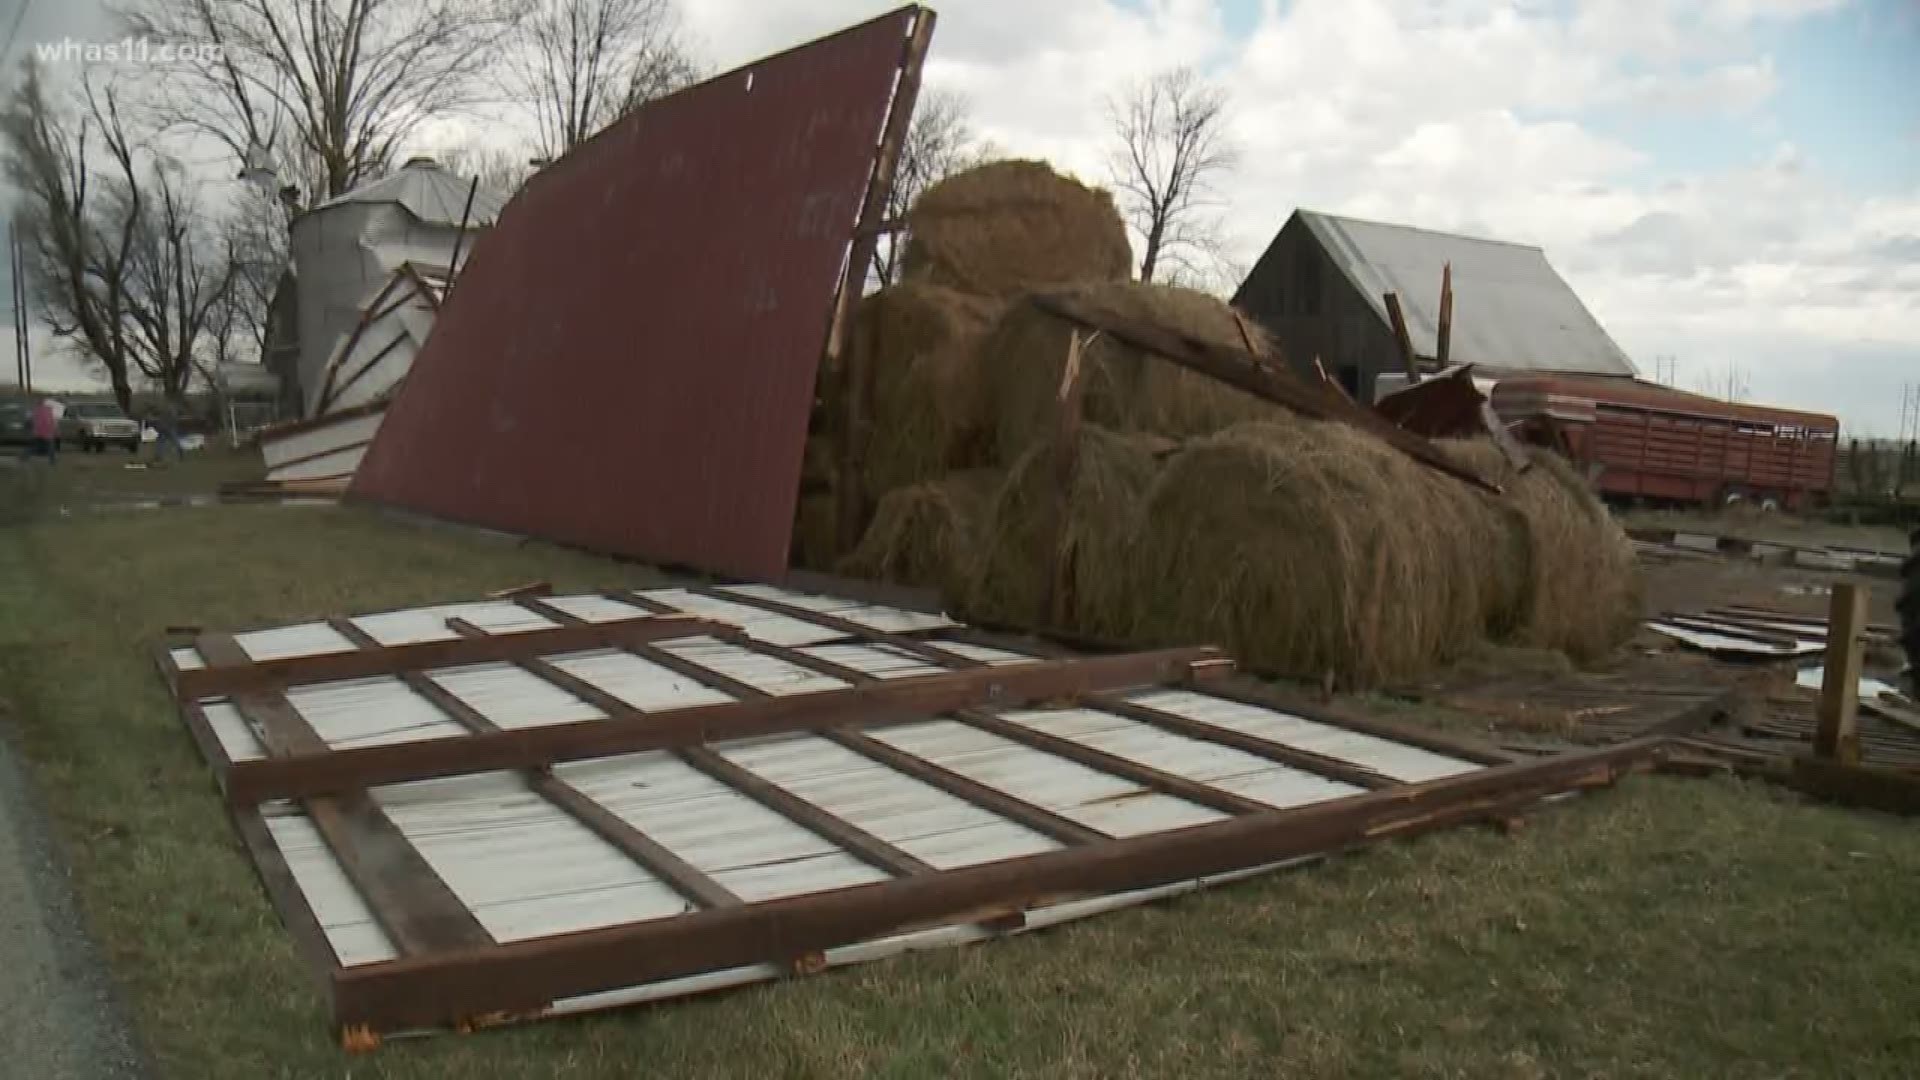 The winds in Seymour reached 94 miles per hour at one point, destroying a family's barn and forcing them to move their cattle.